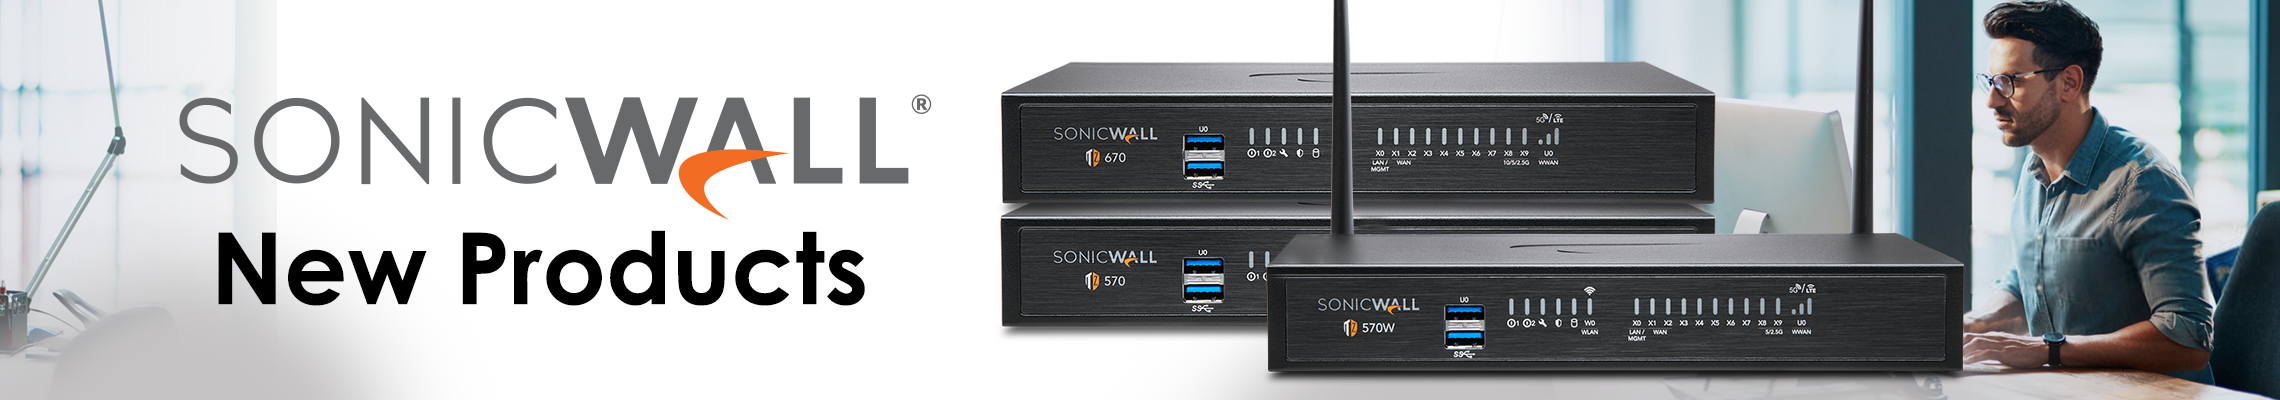 SonicWall New Products